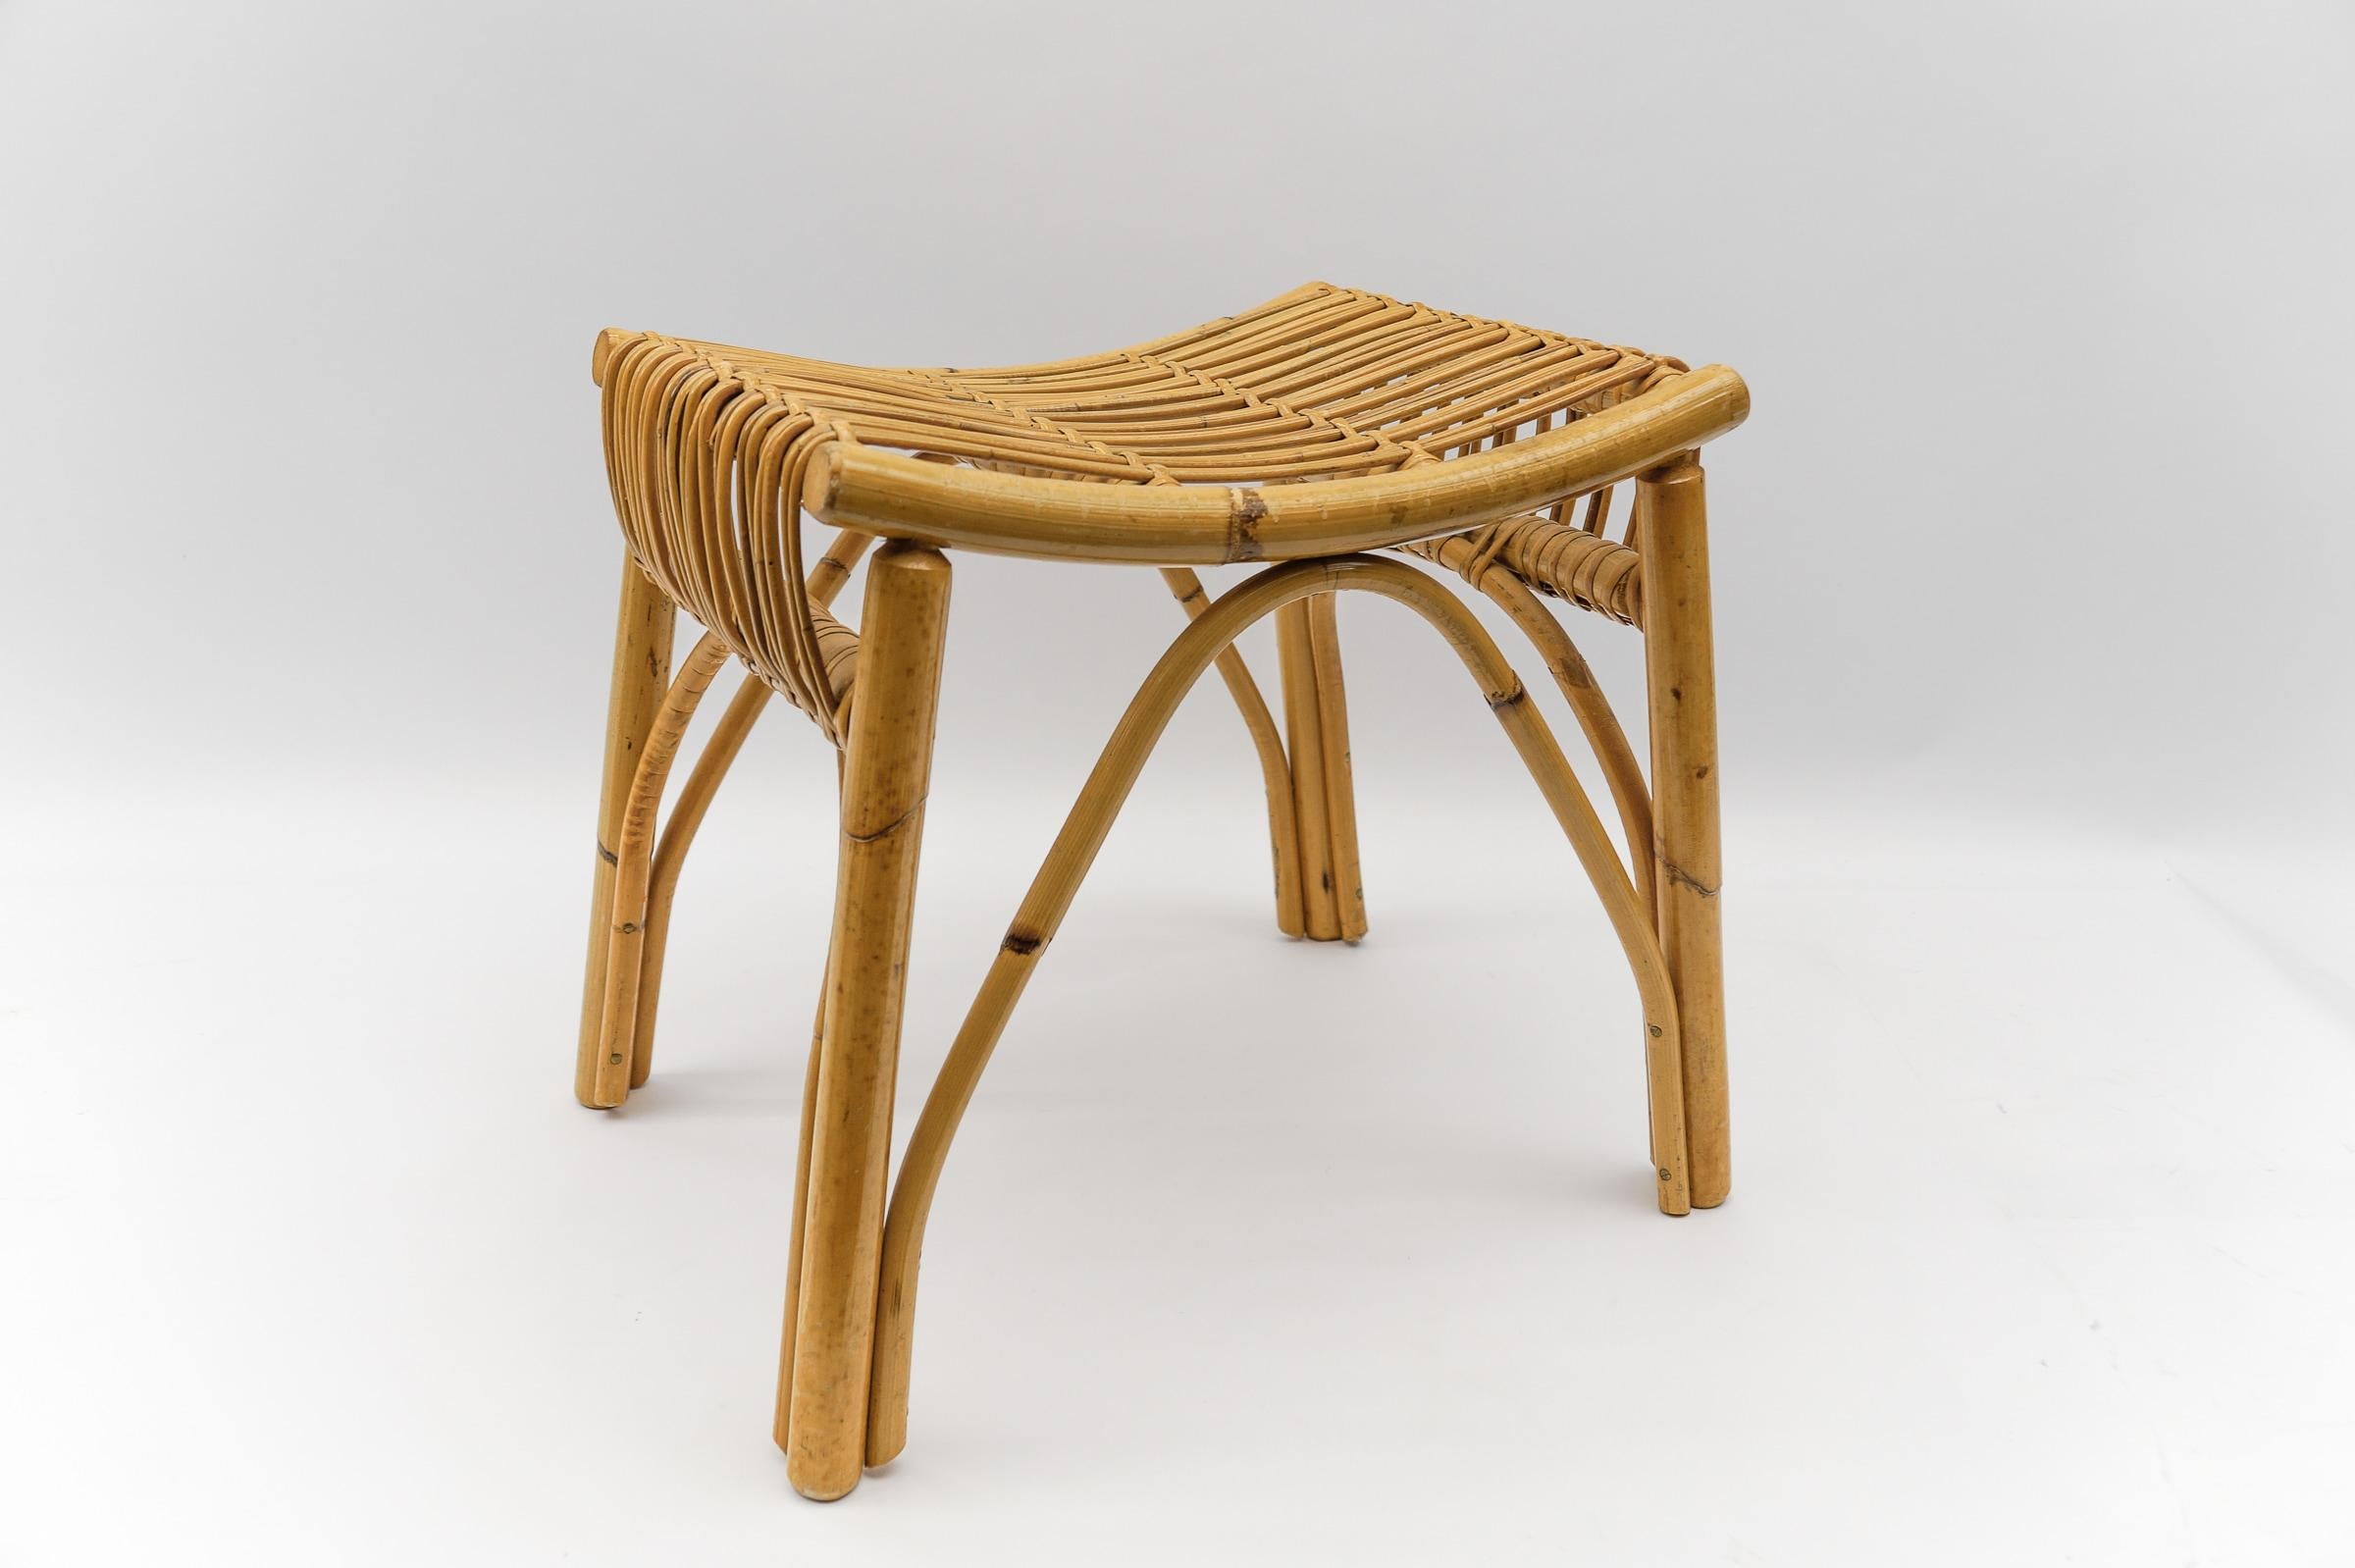 Bamboo Mid-Century Modern Rattan Stool, Italy 1950s For Sale